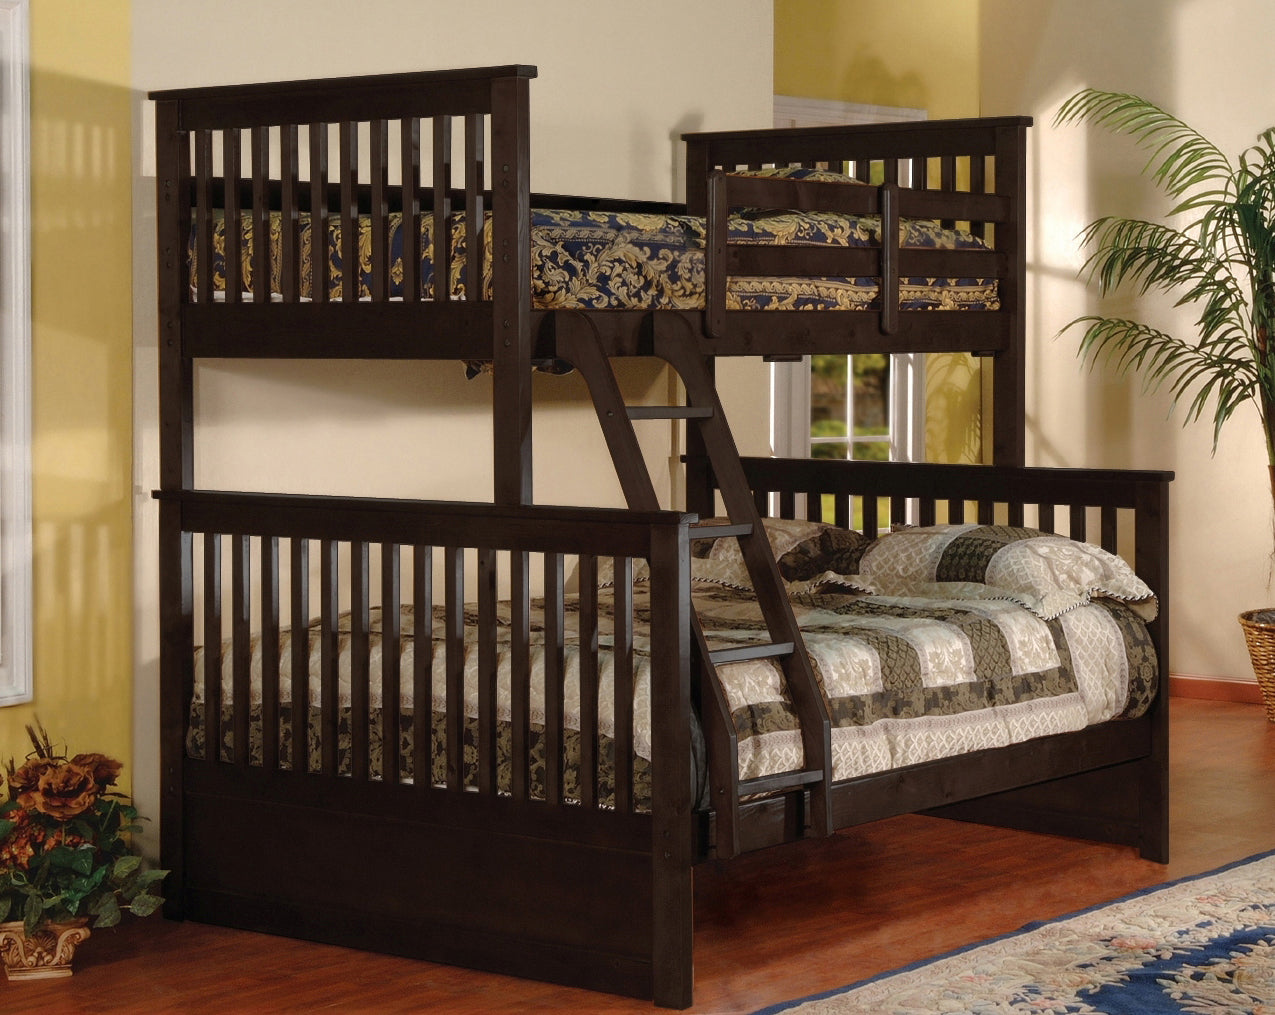 ELLIOT  - SINGLE OVER DOUBLE SOLID WOOD BUNK BED (White, Espresso)